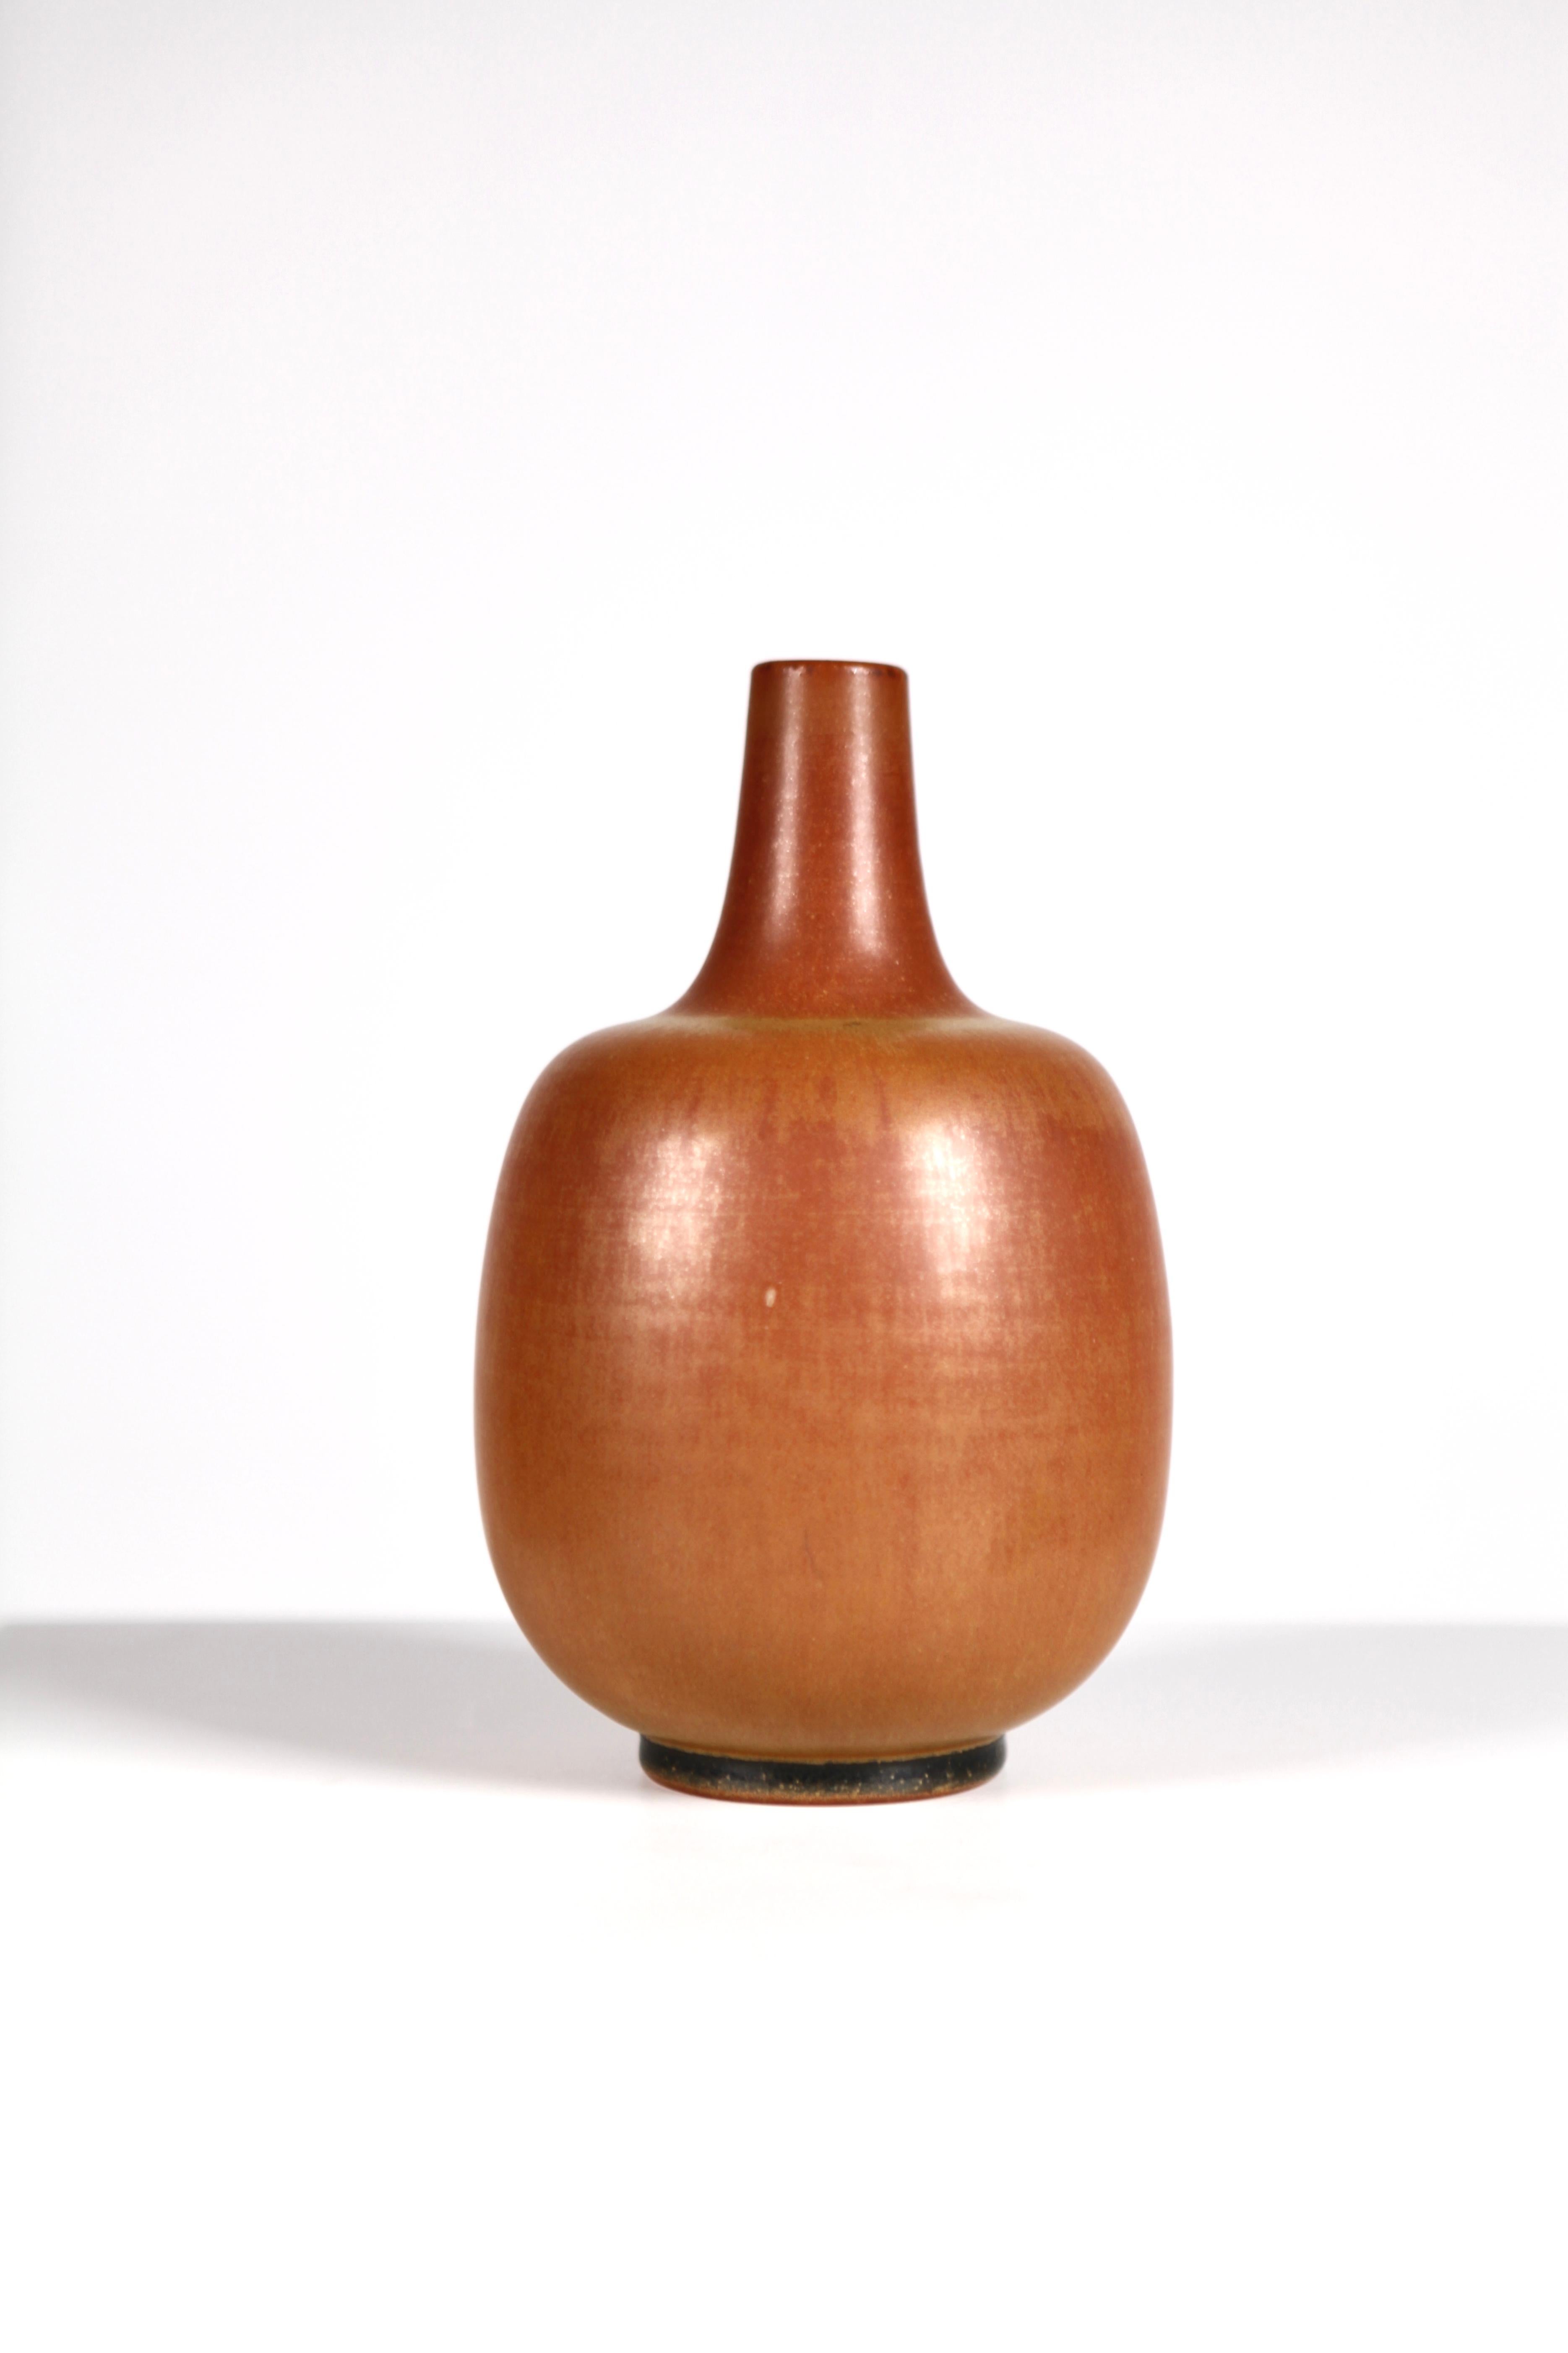 Unique & tall stoneware vase in reddish brown haresfur glaze by Erich & Ingrid Triller, Tobo, Sweden 1950s.
The ceramic design specialists Erich and Ingrid Triller, German by origin, Bauhaus educated, set up their Studio in Tobo, Sweden in the